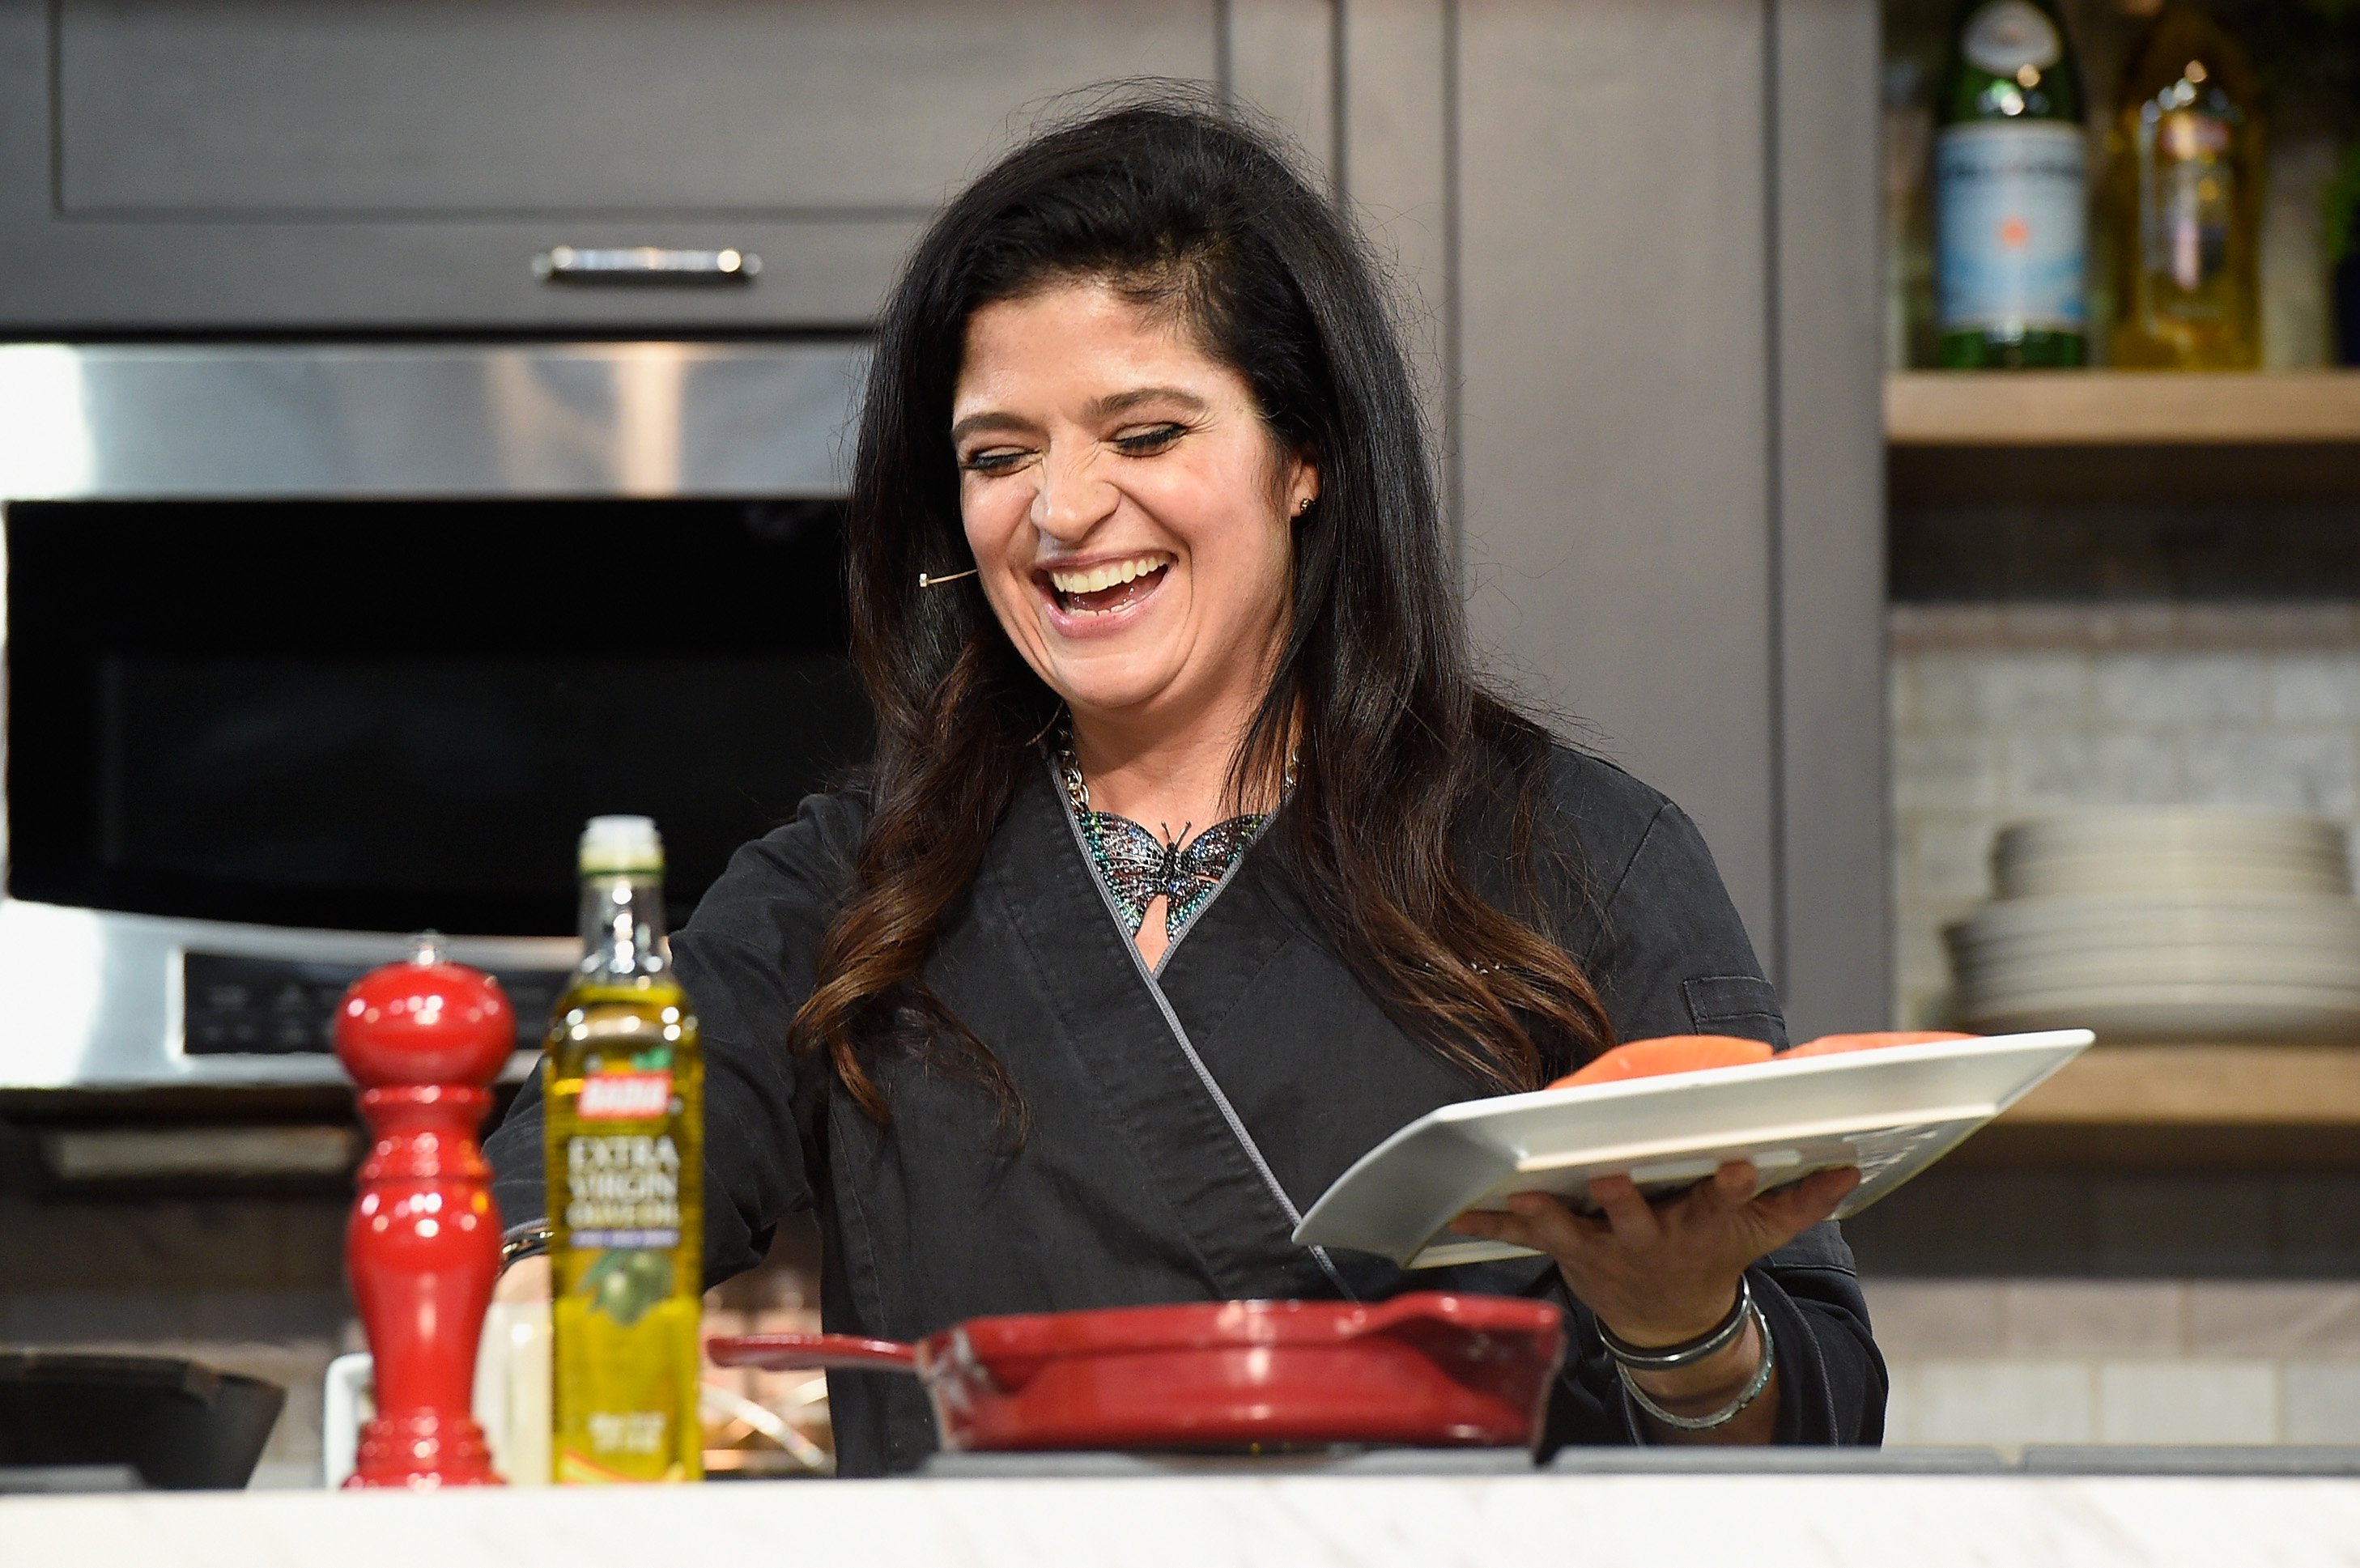 Alex Guarnaschelli & Decade Younger Fiancé Split ⁠— He Proposed after ...